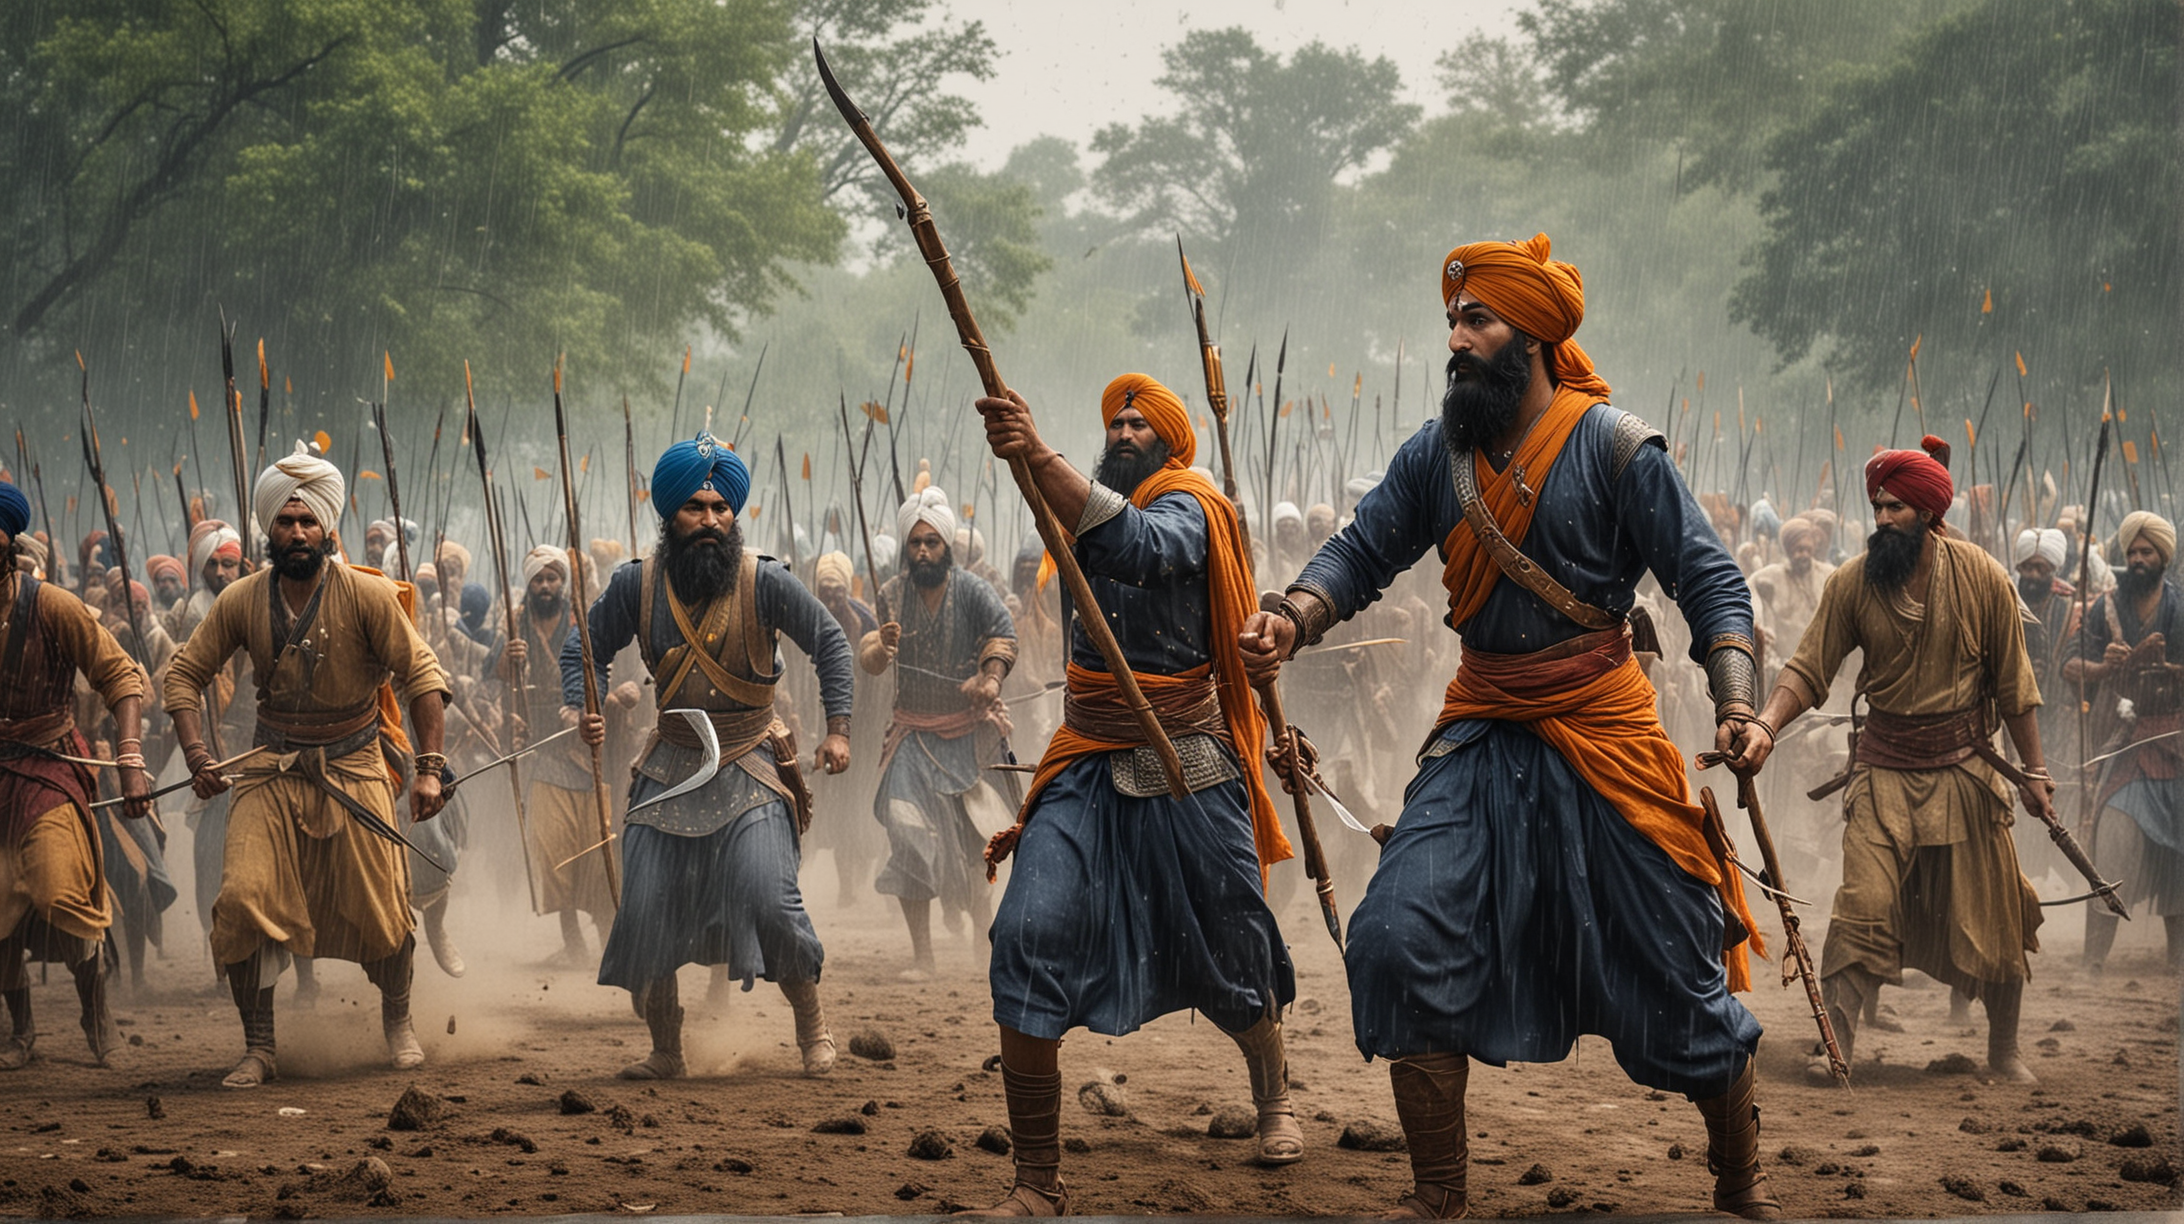 sikh warriors raining arrows down on the approaching army. Set in India 300 years ago. 